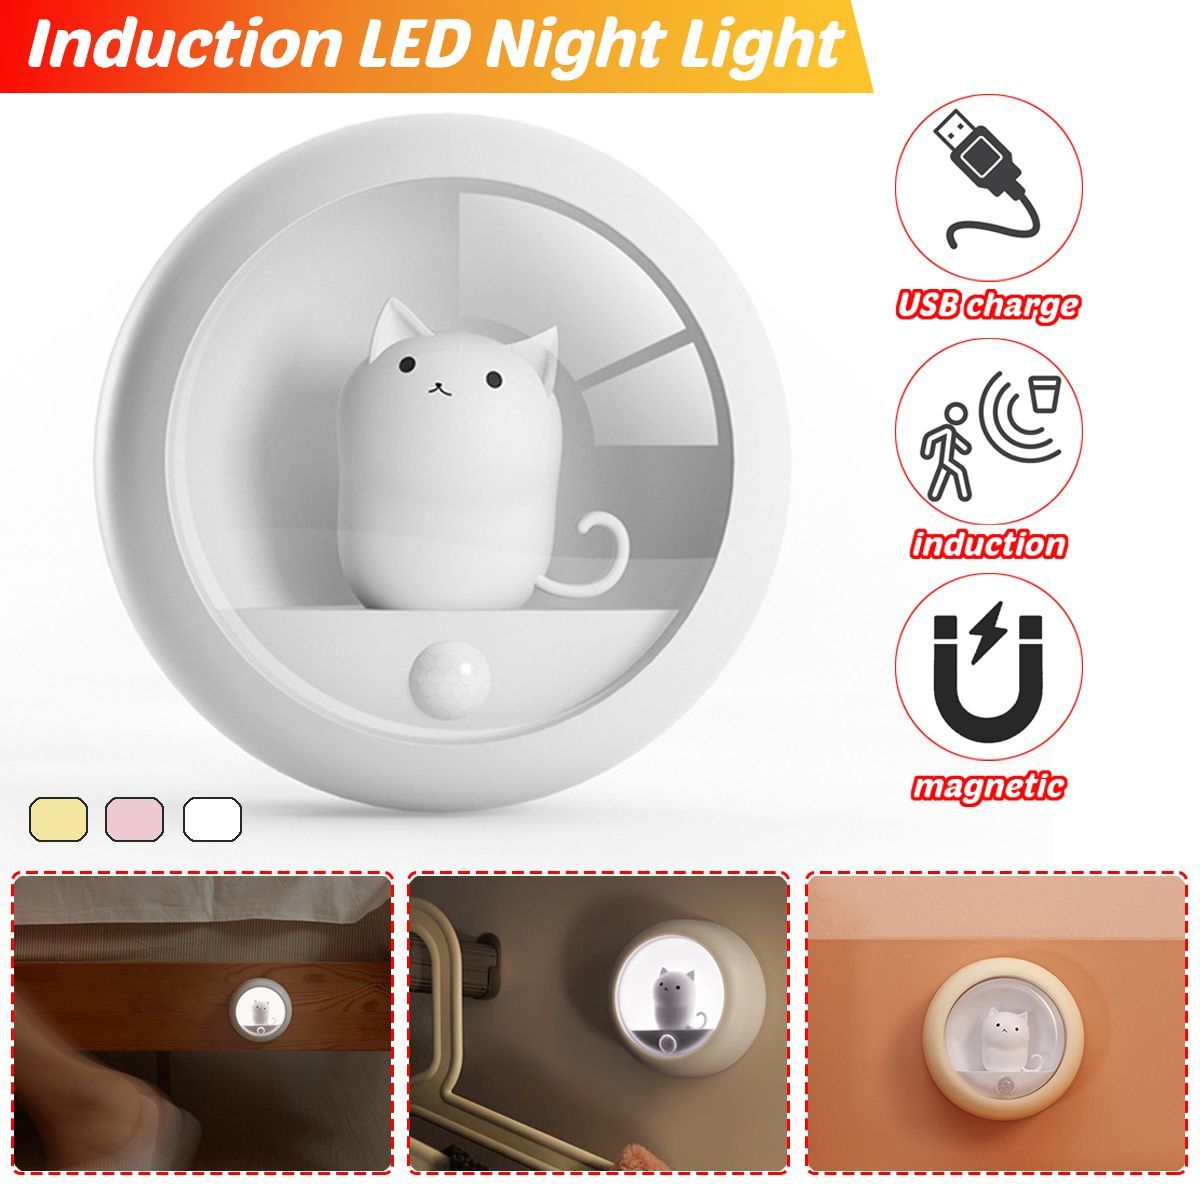 LED-Night-Light-Cat-Cabinet-Magnetic-Rechargeable-Hanging-Lamp-Bedside-Table-Room-1721044